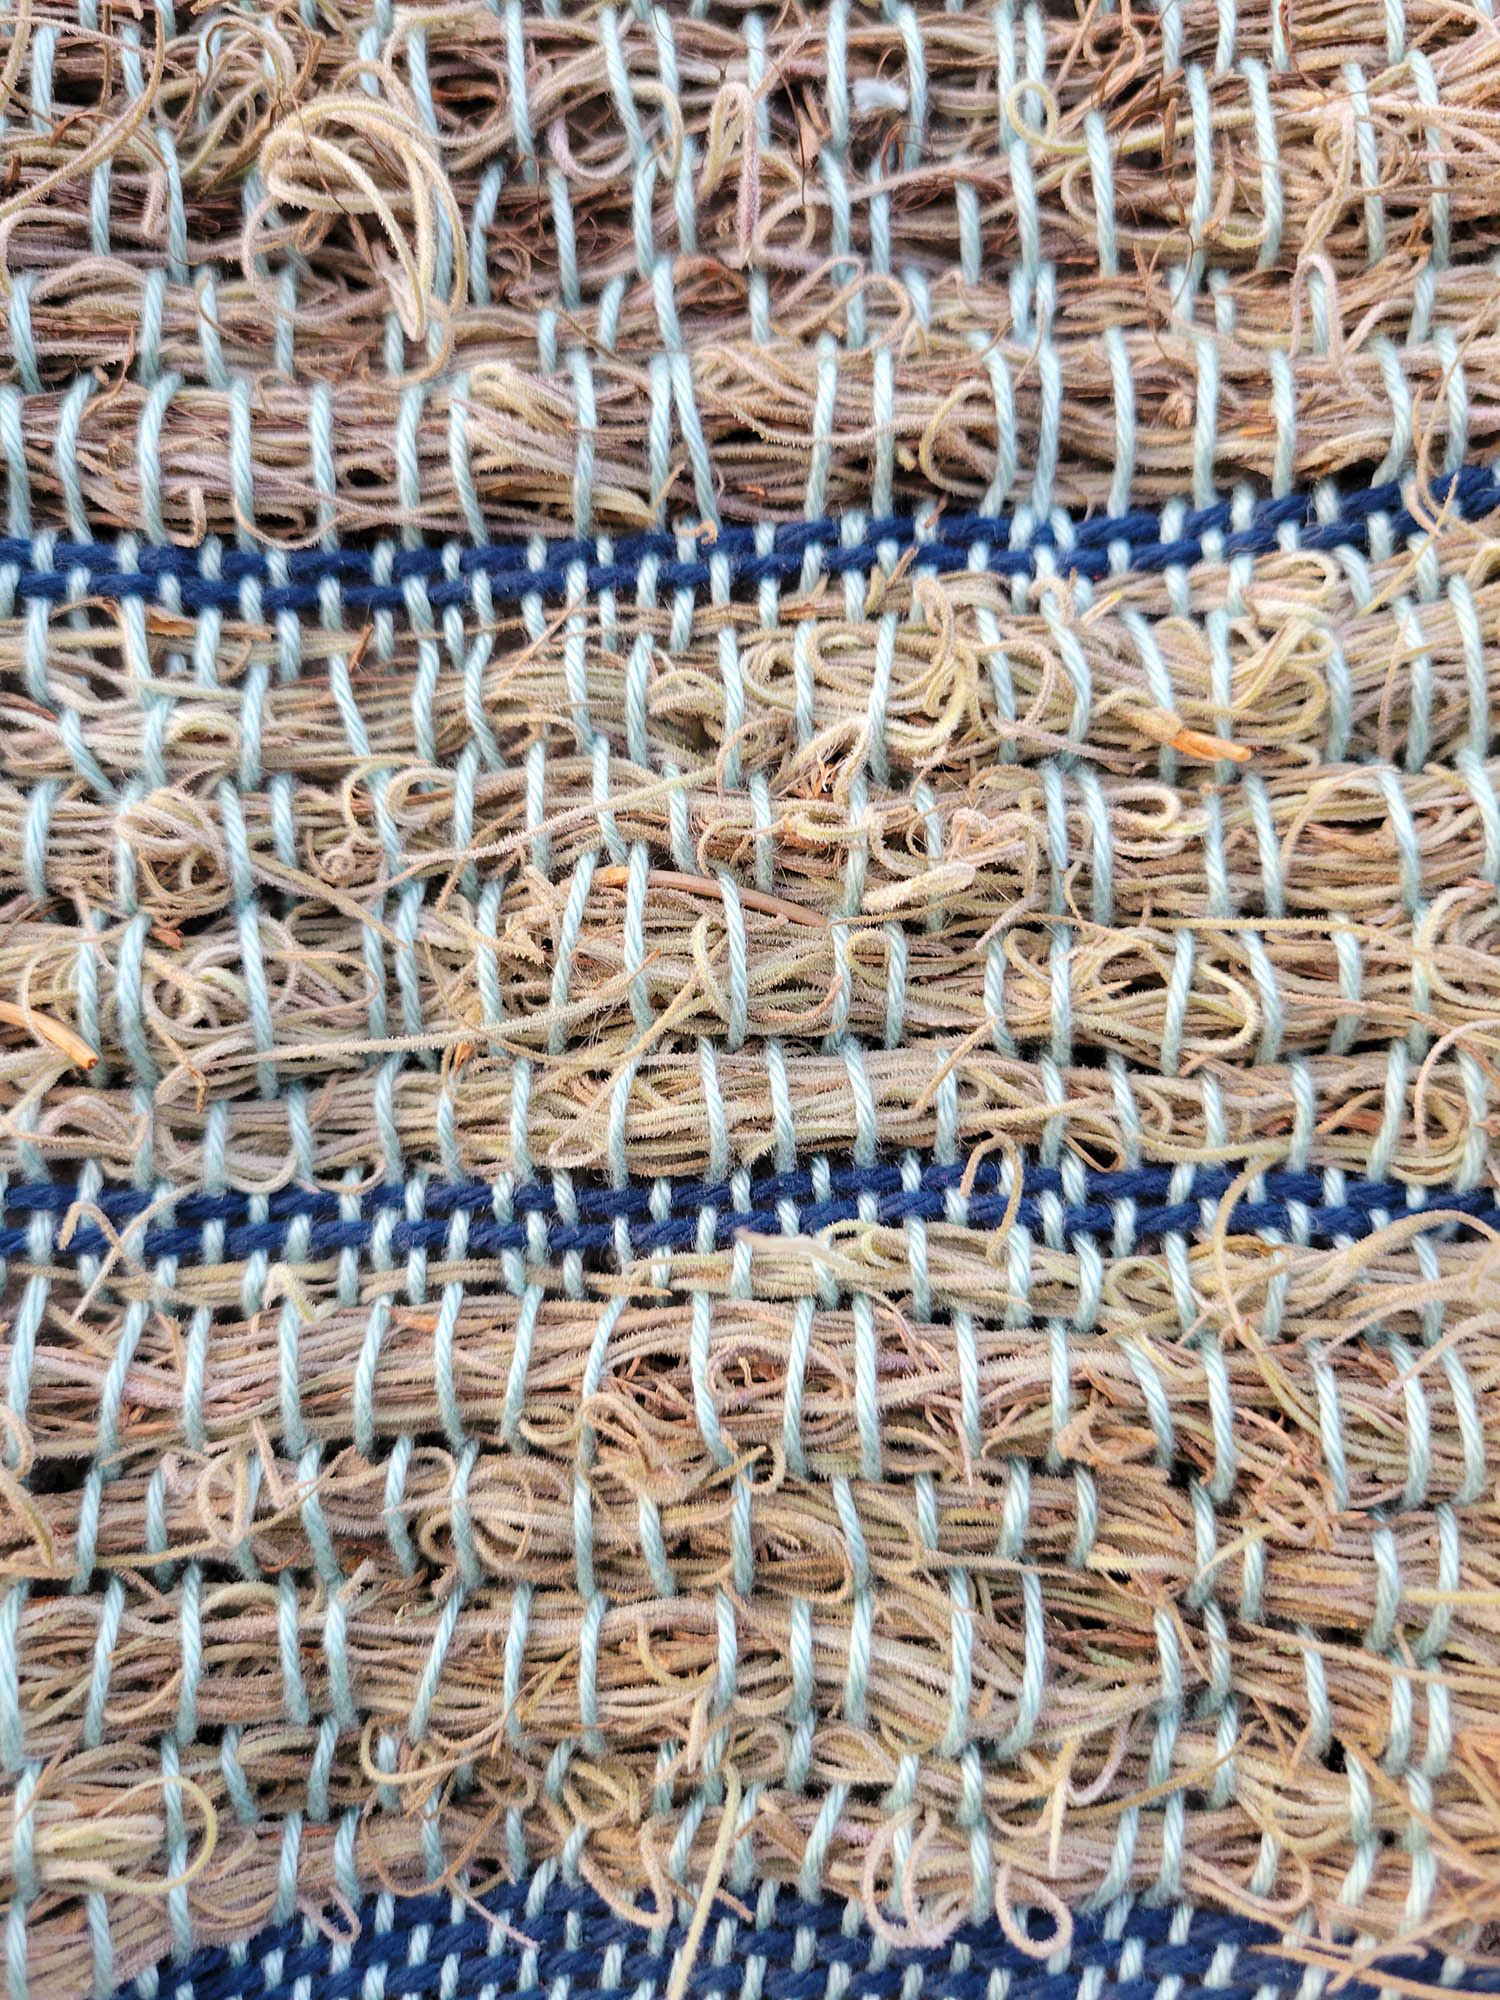 Close up of the texture of the Spanish moss weaving